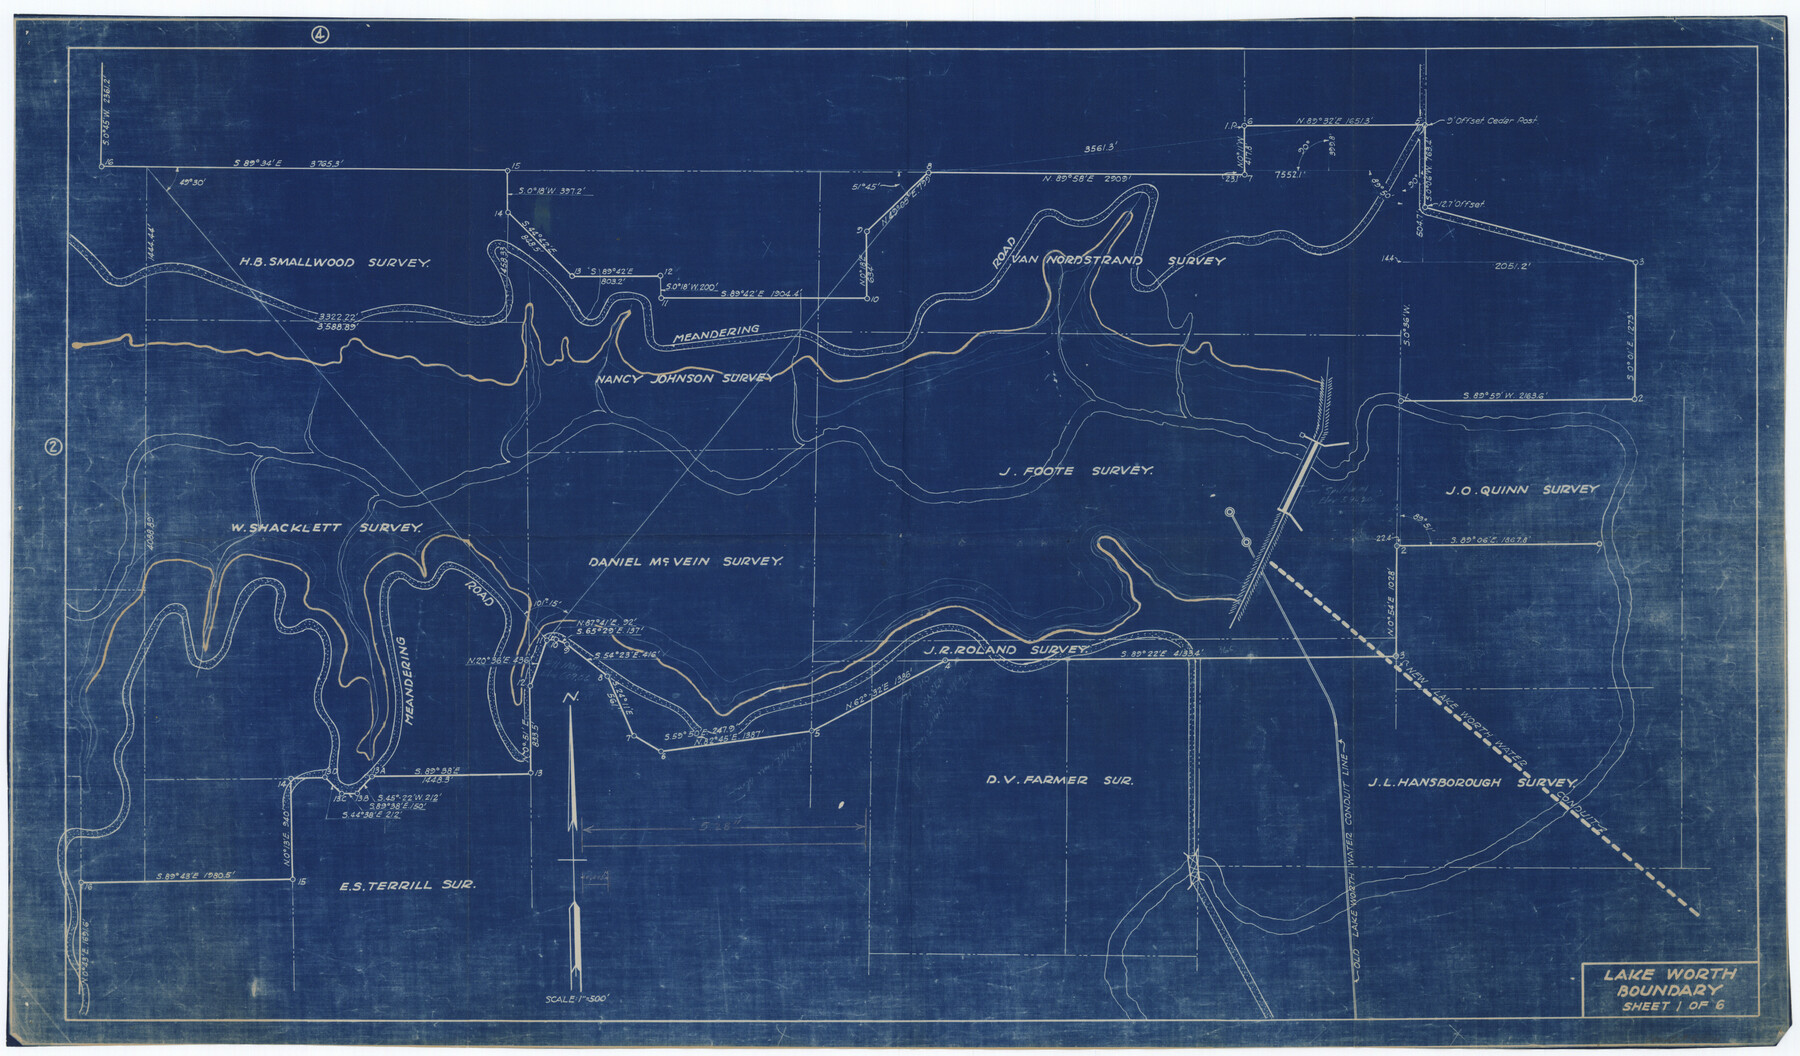 62211, Lake Worth Boundary, General Map Collection